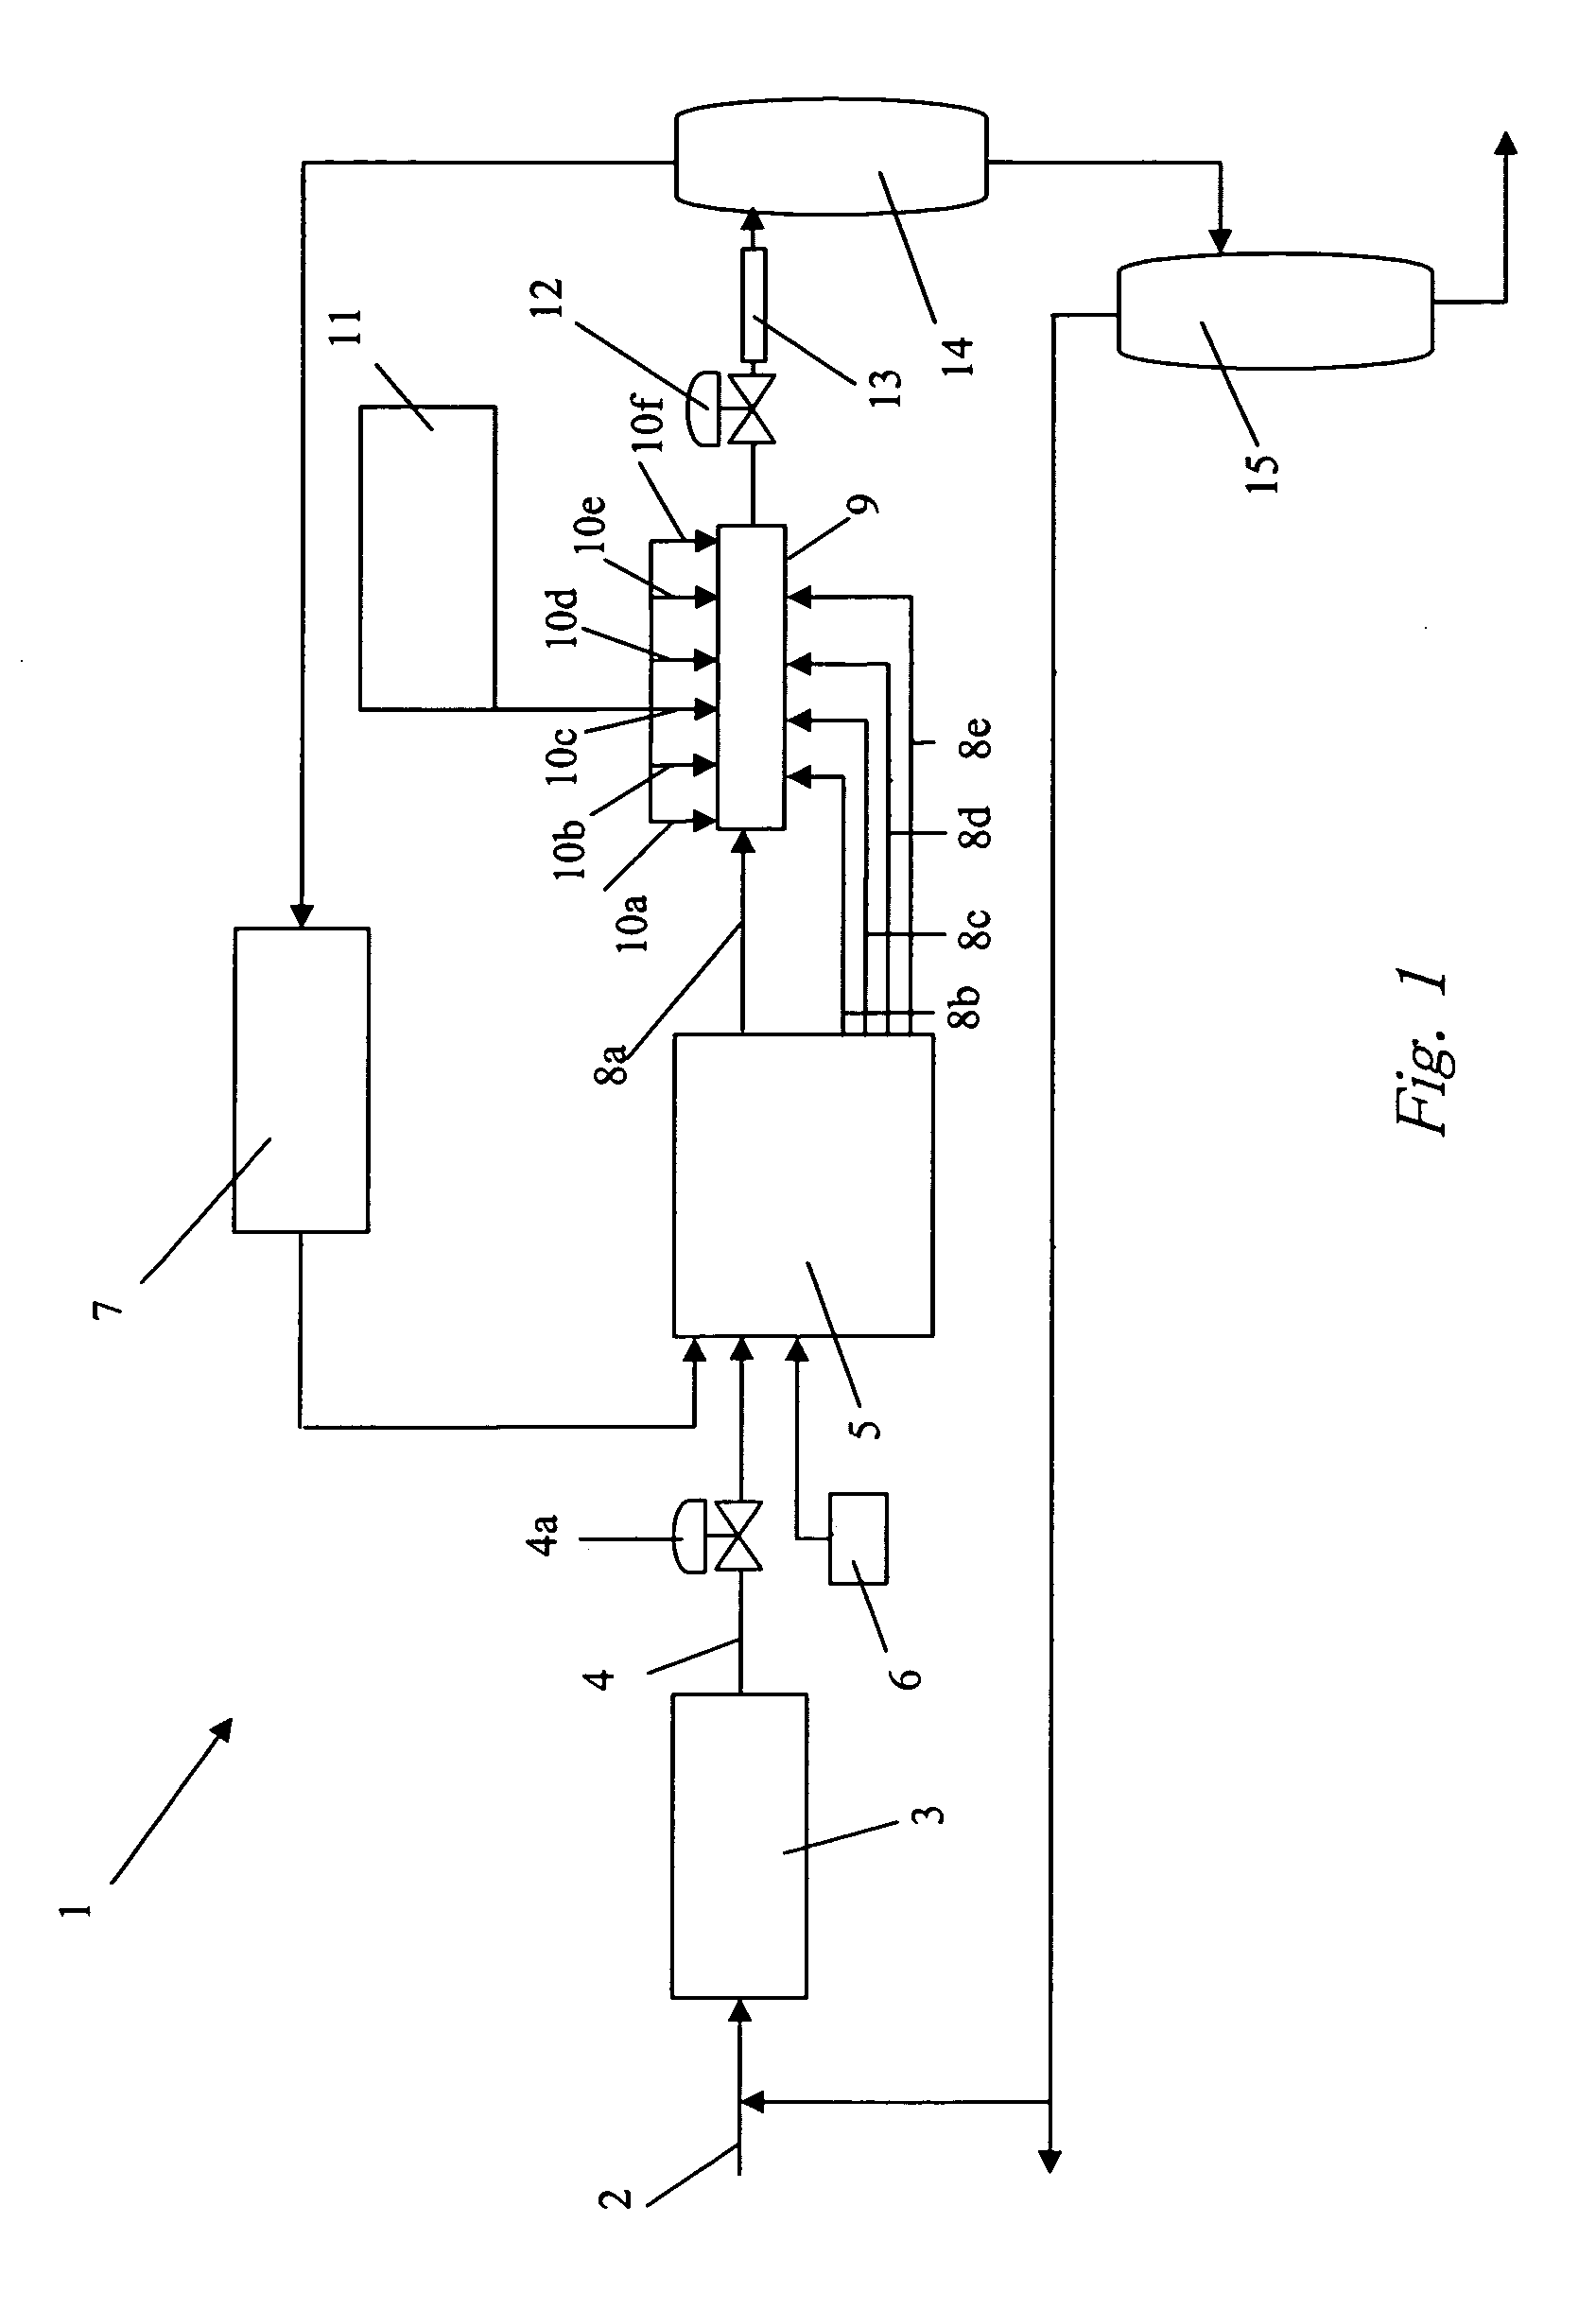 Process and apparatus for manufacturing ethylene polymers and copolymers